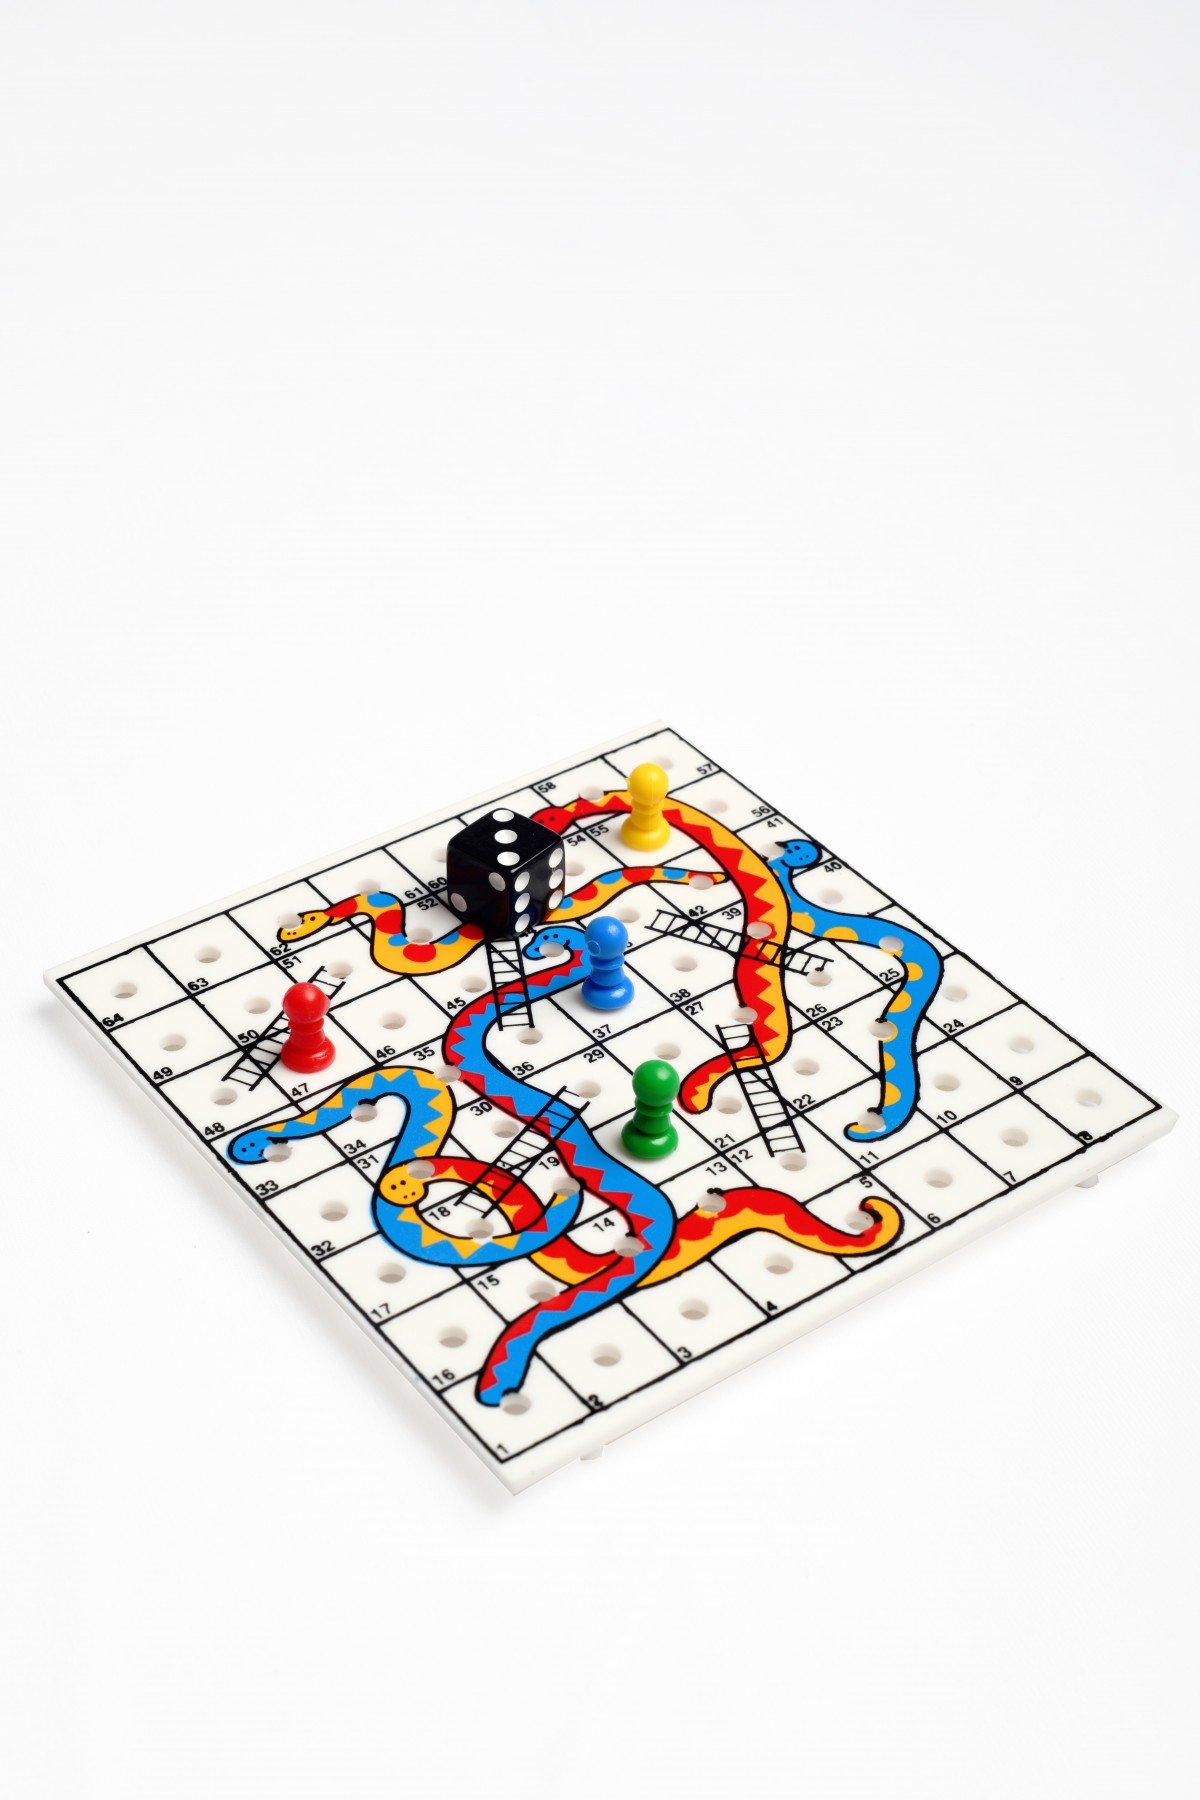 Youreka Mini Games Travel Snake & Ladders Board Games for Kids Age 5Y+